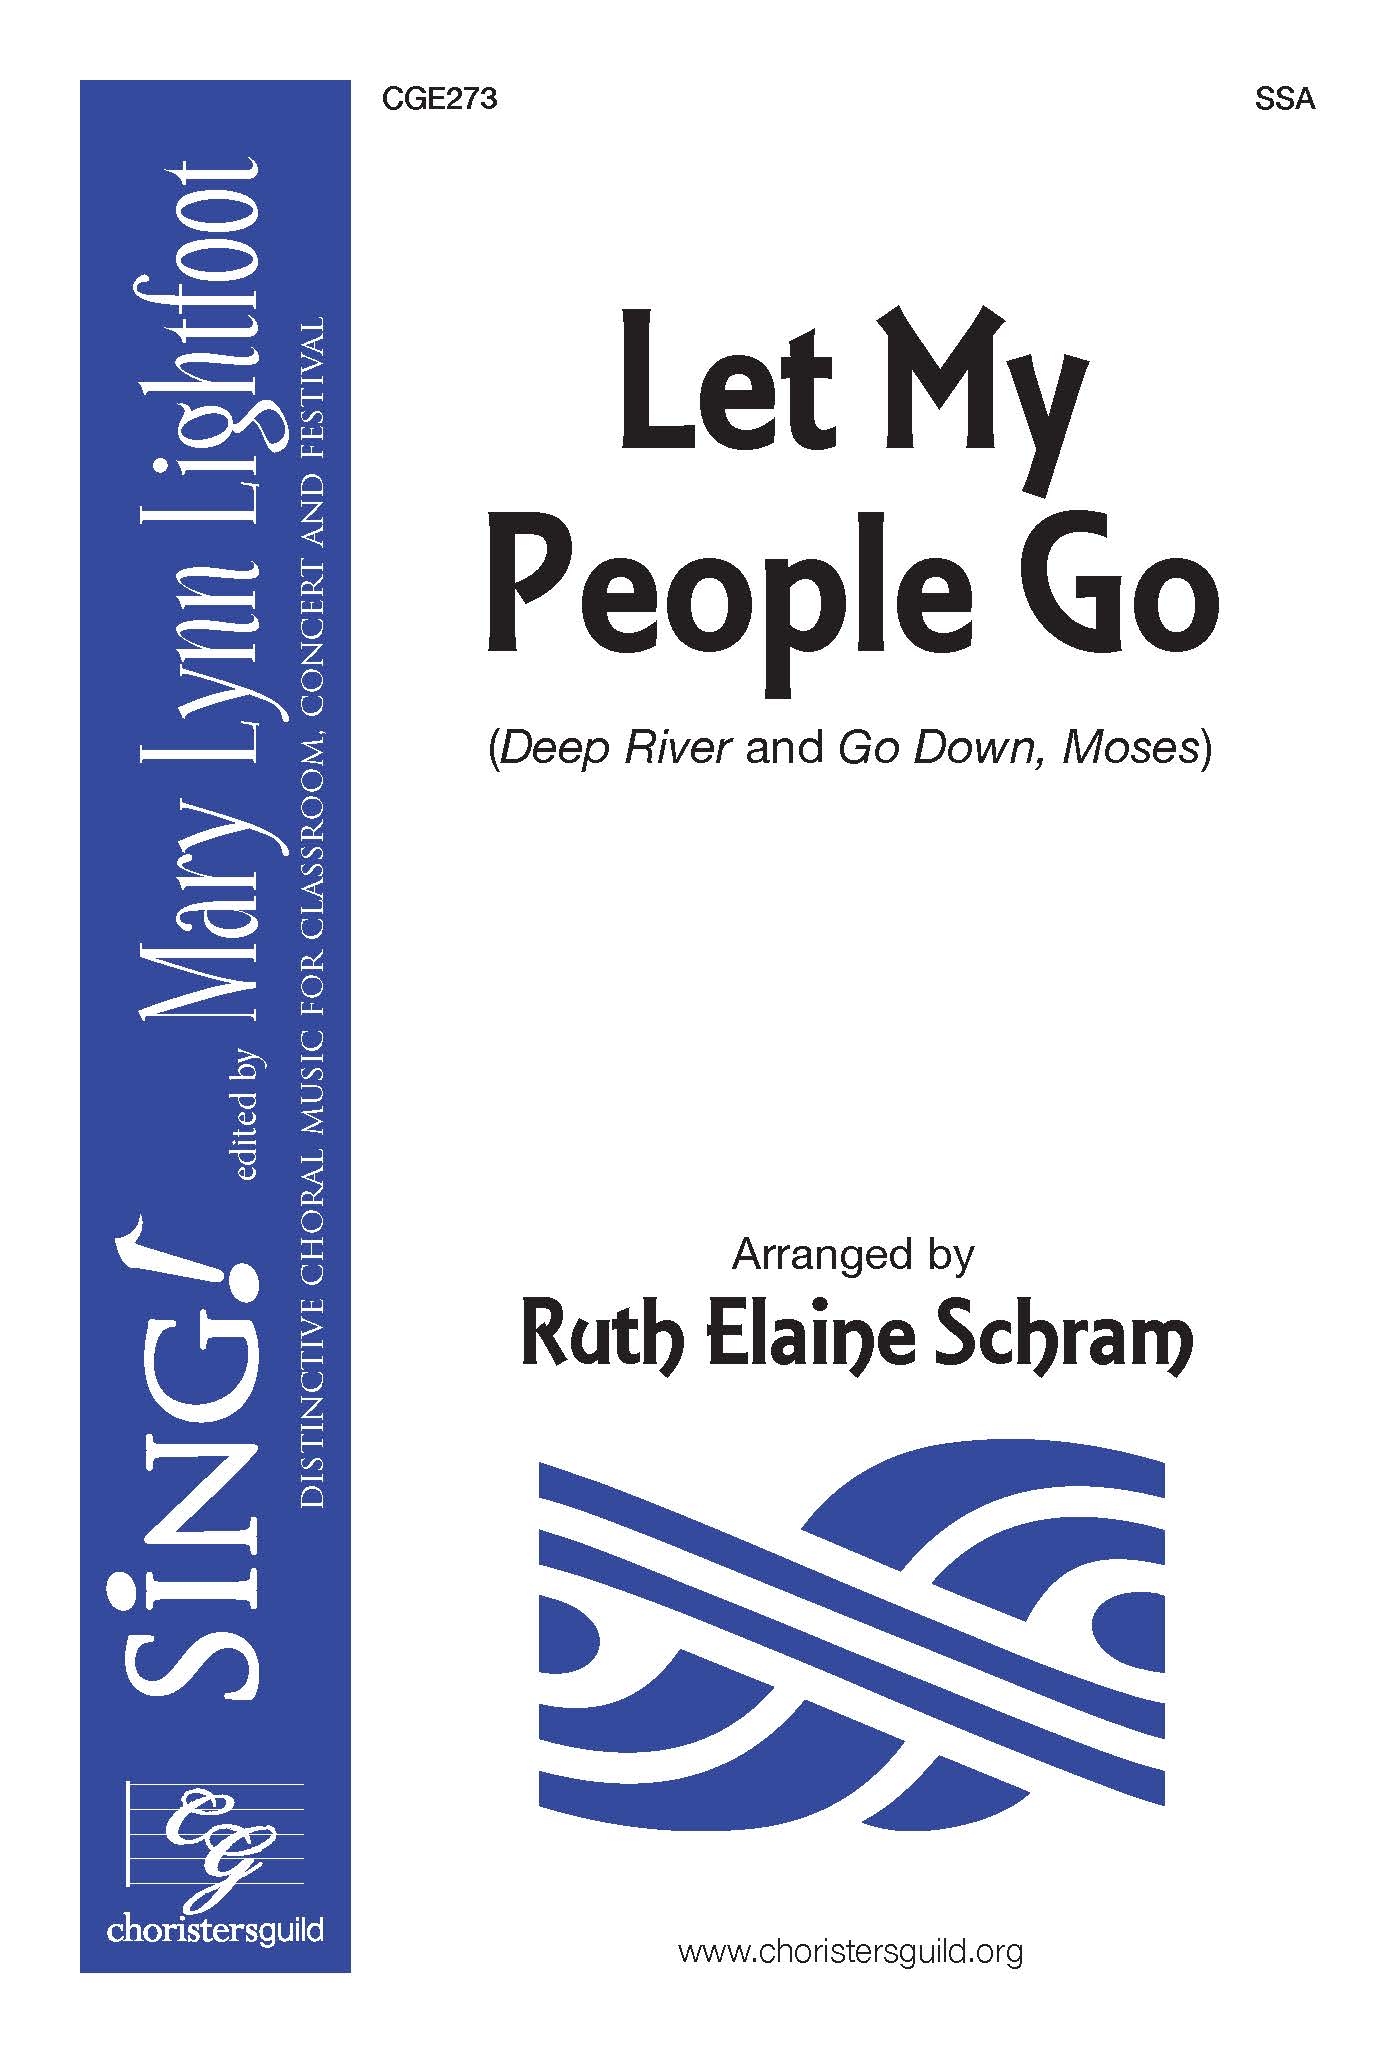 Let My People Go - SSA